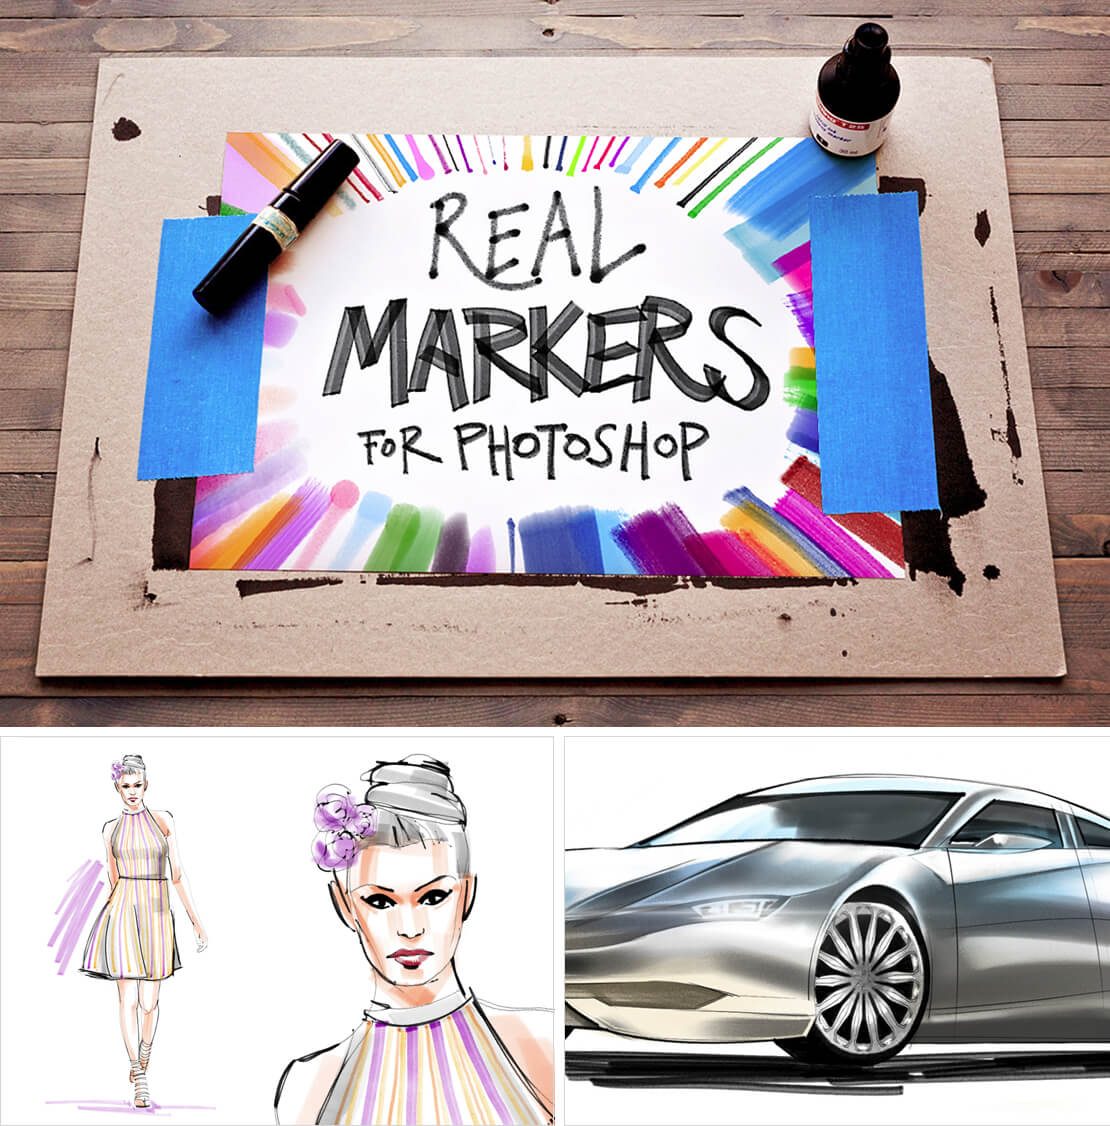 Real Markers for Photoshop